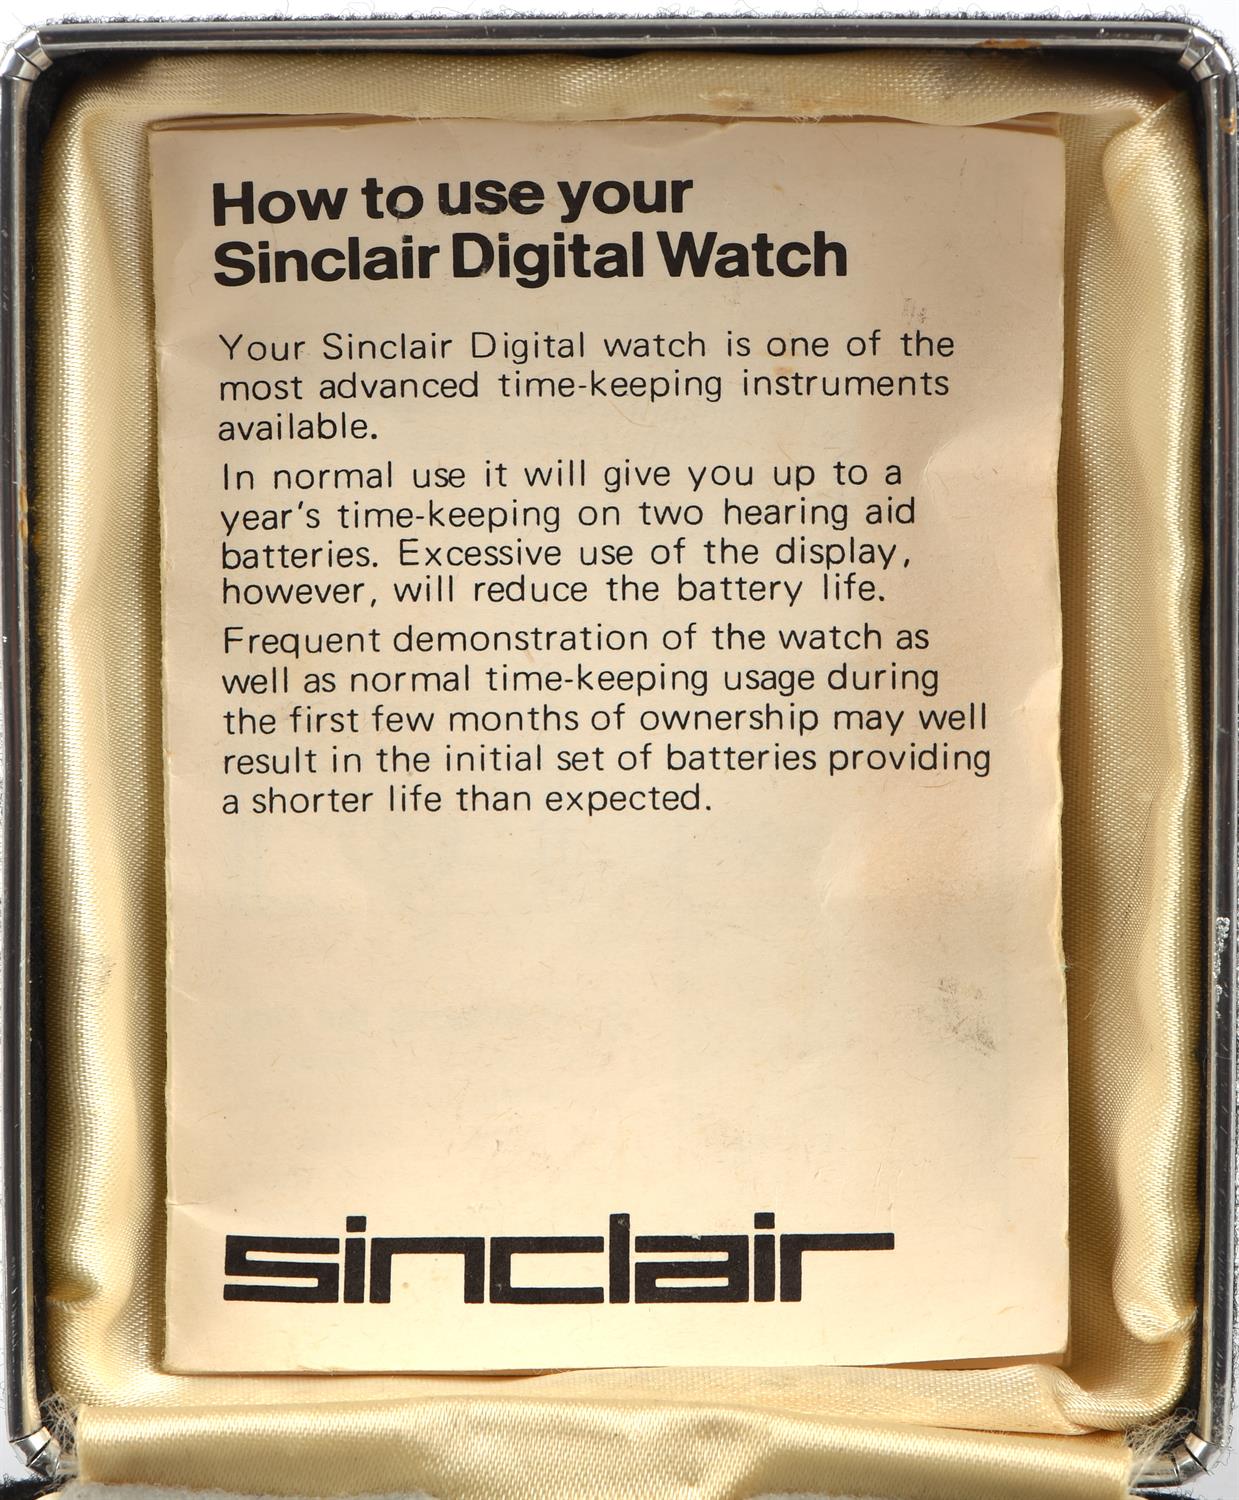 Sinclair Radionics, a black Sinclair watch, in case, with instruction book - Image 4 of 5